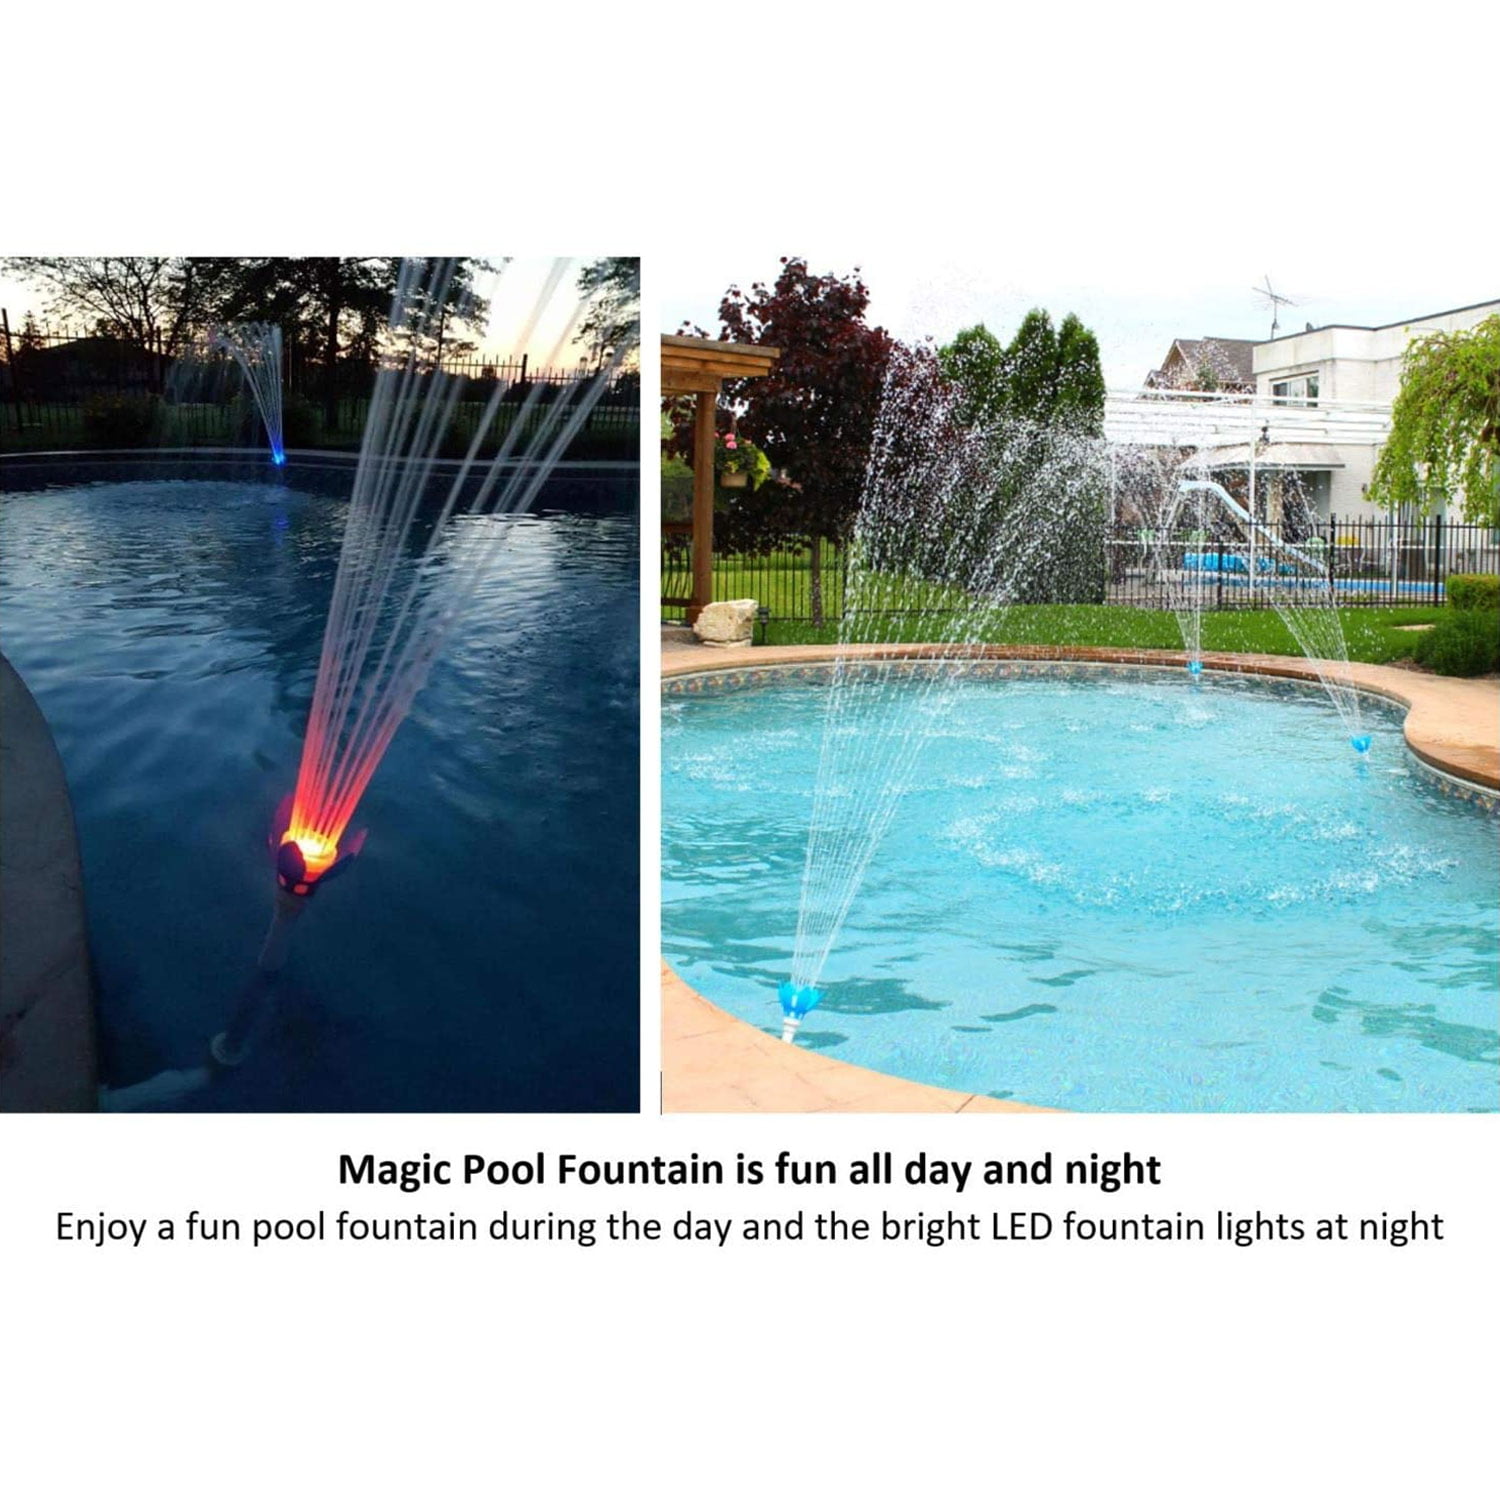 No Tools Req’d Simply Screw in & Replace Your Standard 1.5” Jet Return Powered by Pool Jets Magic Lite-A Pool Pool Jet with LED Lights Provide Ambient Pool Lighting w/o Batteries 